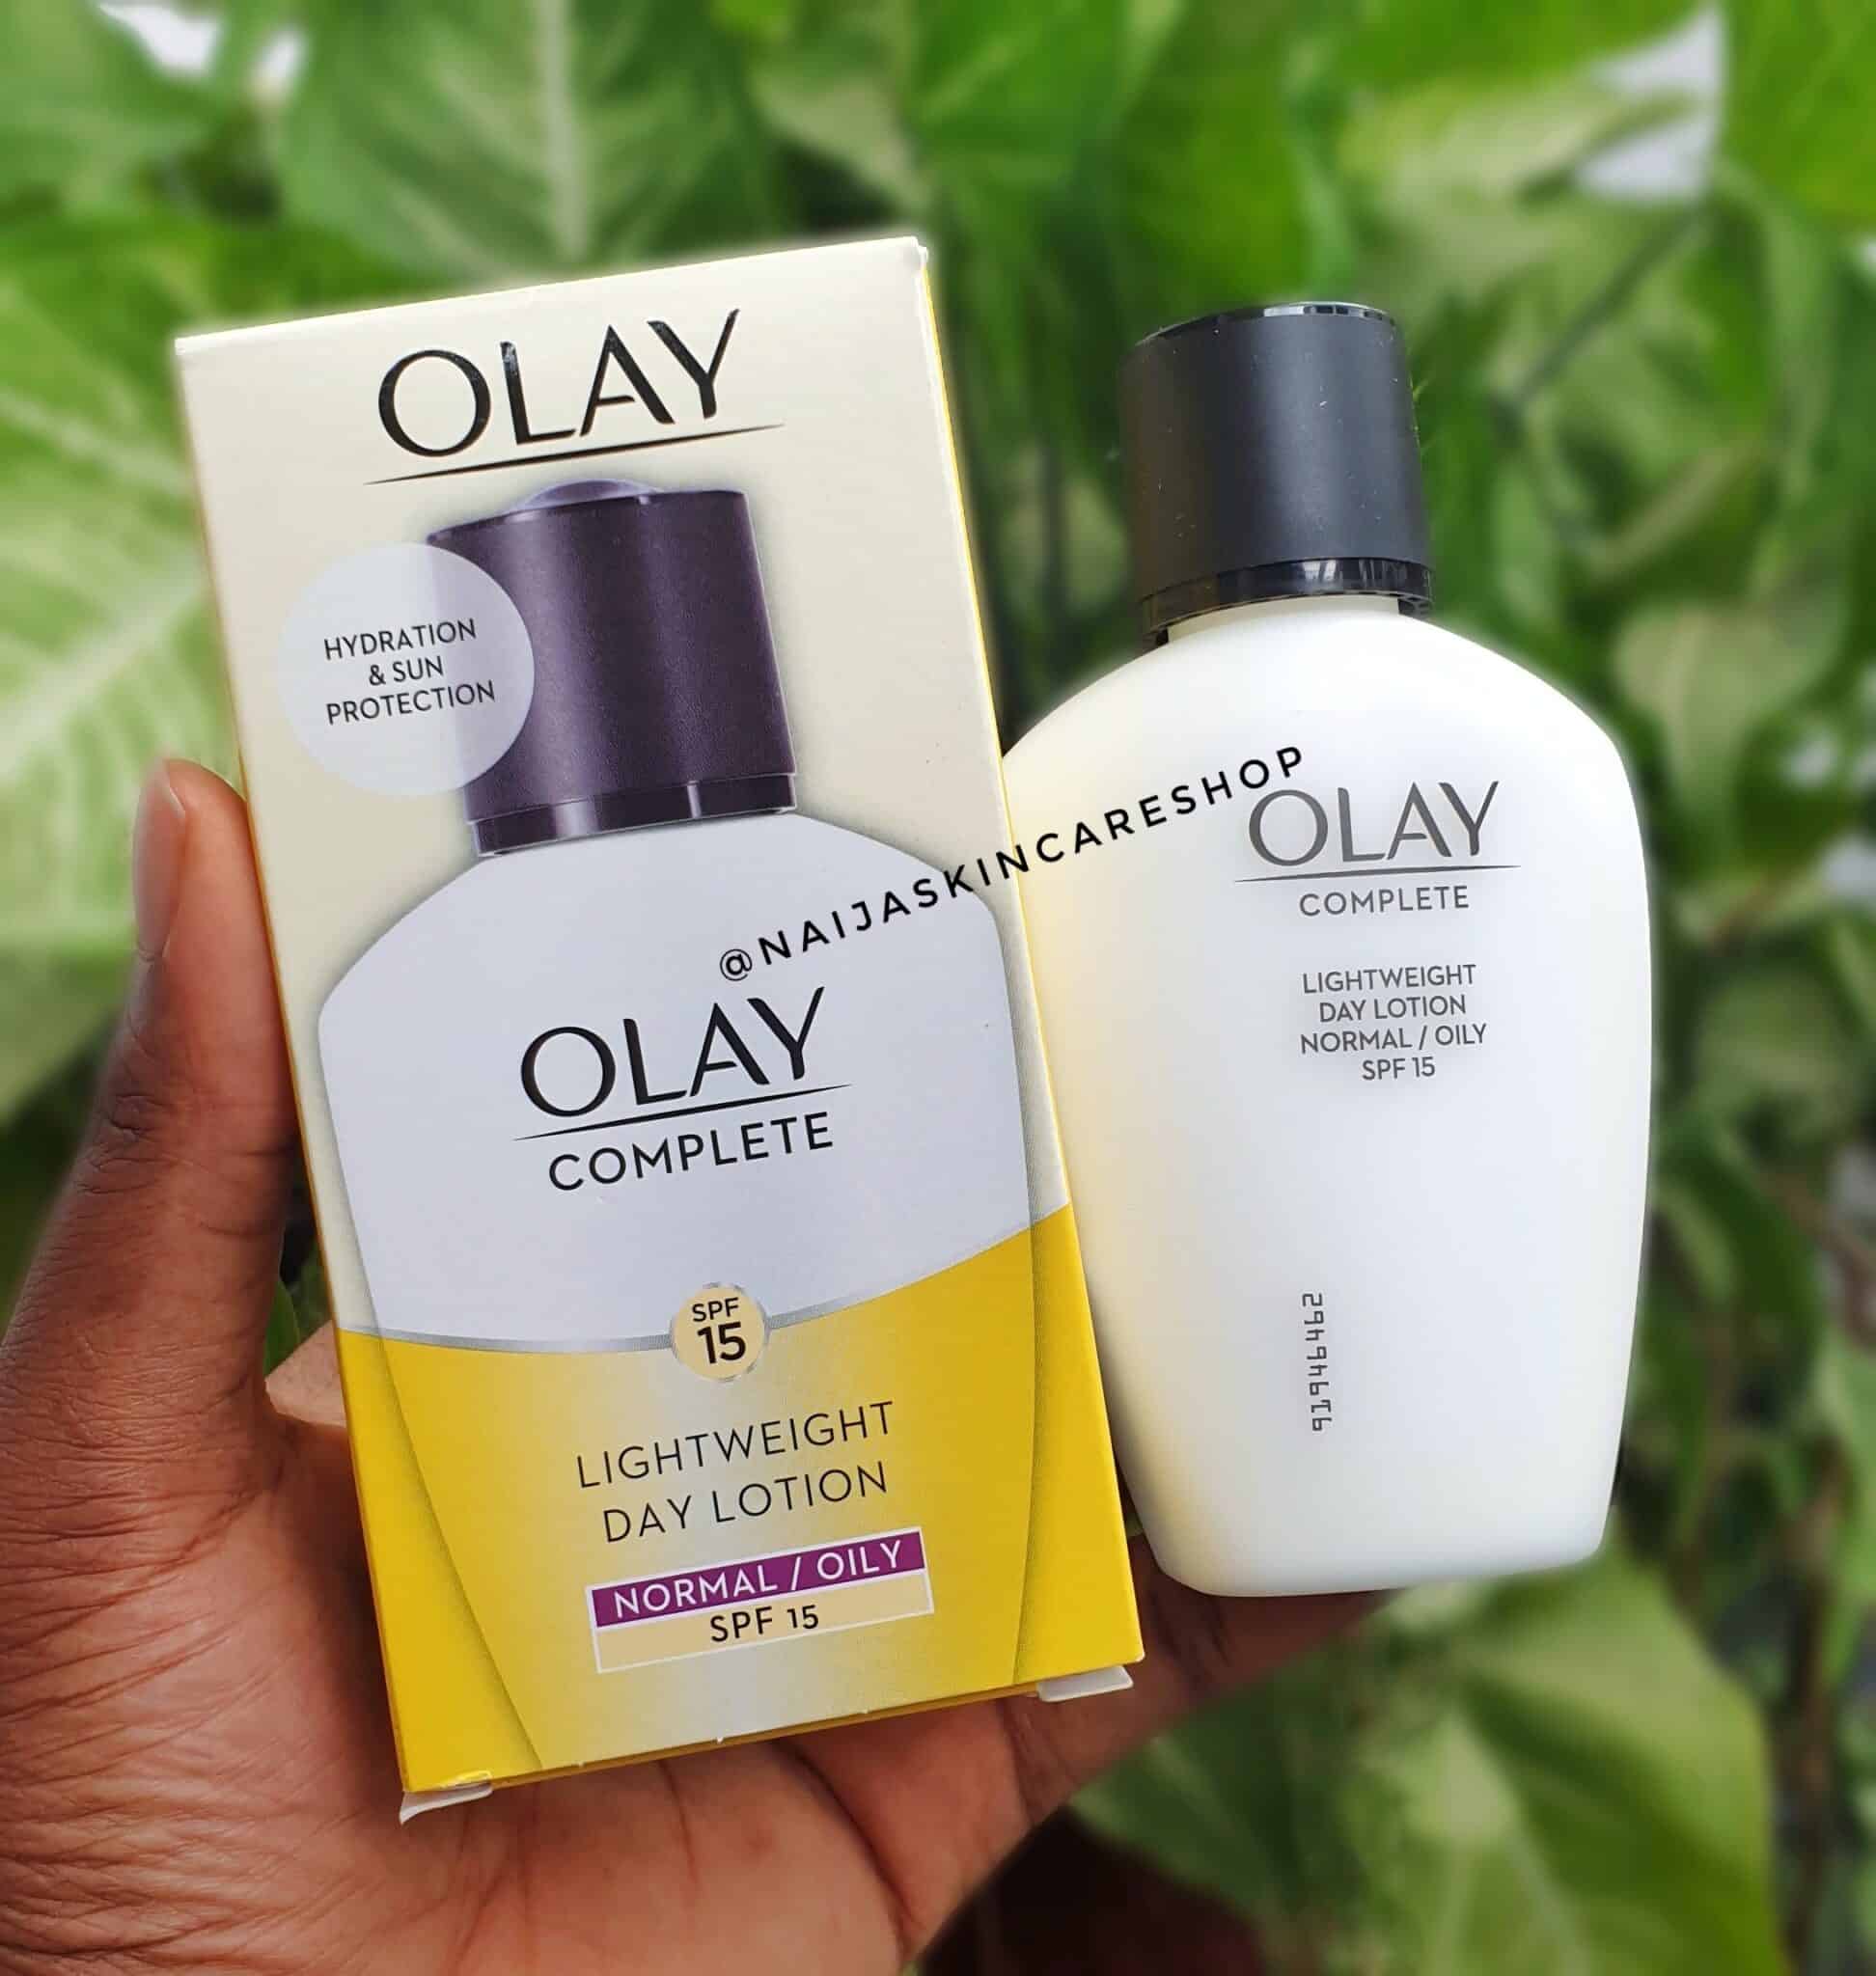 Olay Complete Lightweight Moisturizer for Normal/Oily Skin with SPF 15 ...